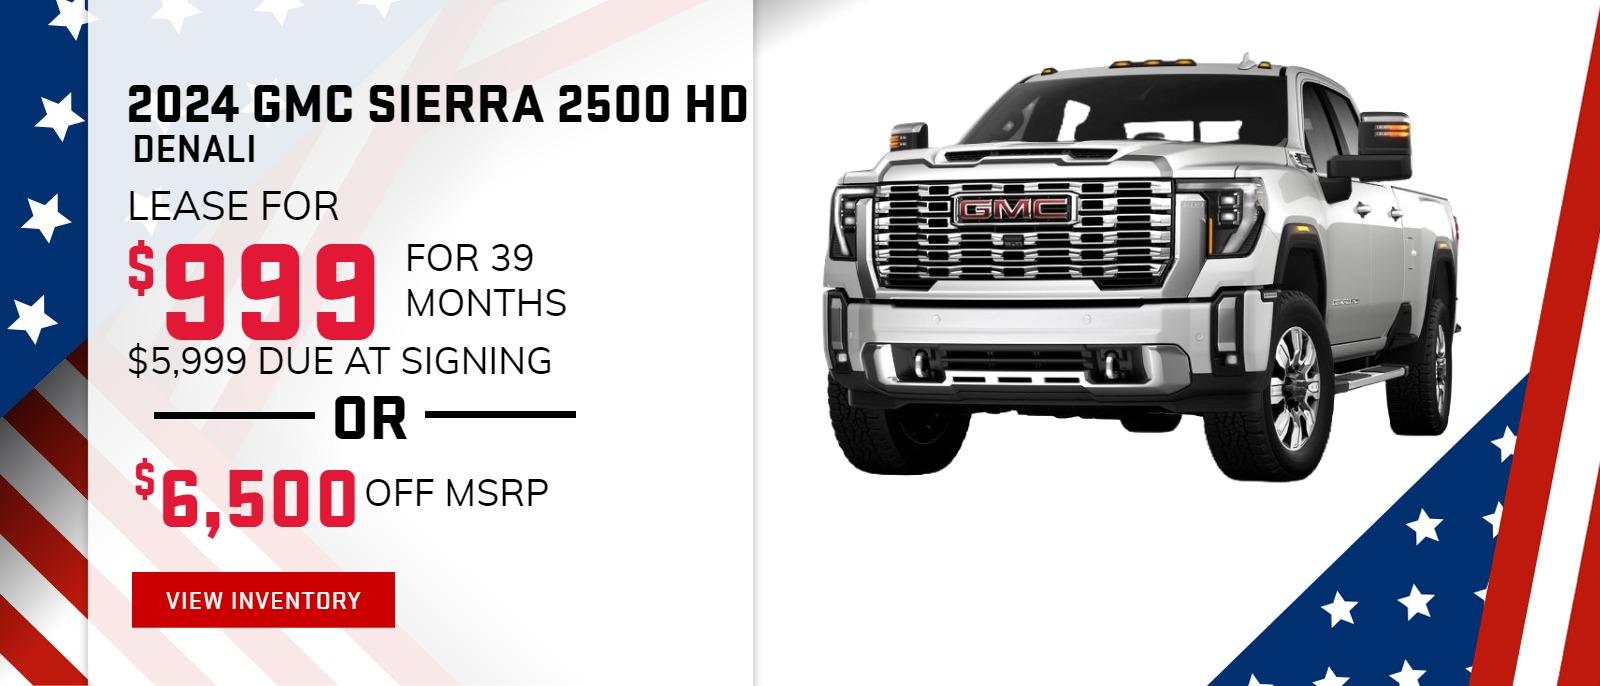 2024 GMC 2500 HD DENALI
$999 Per Month / 39 Month Lease / $5999 due at signingg
$6,500 OFF MSRP!!!!!